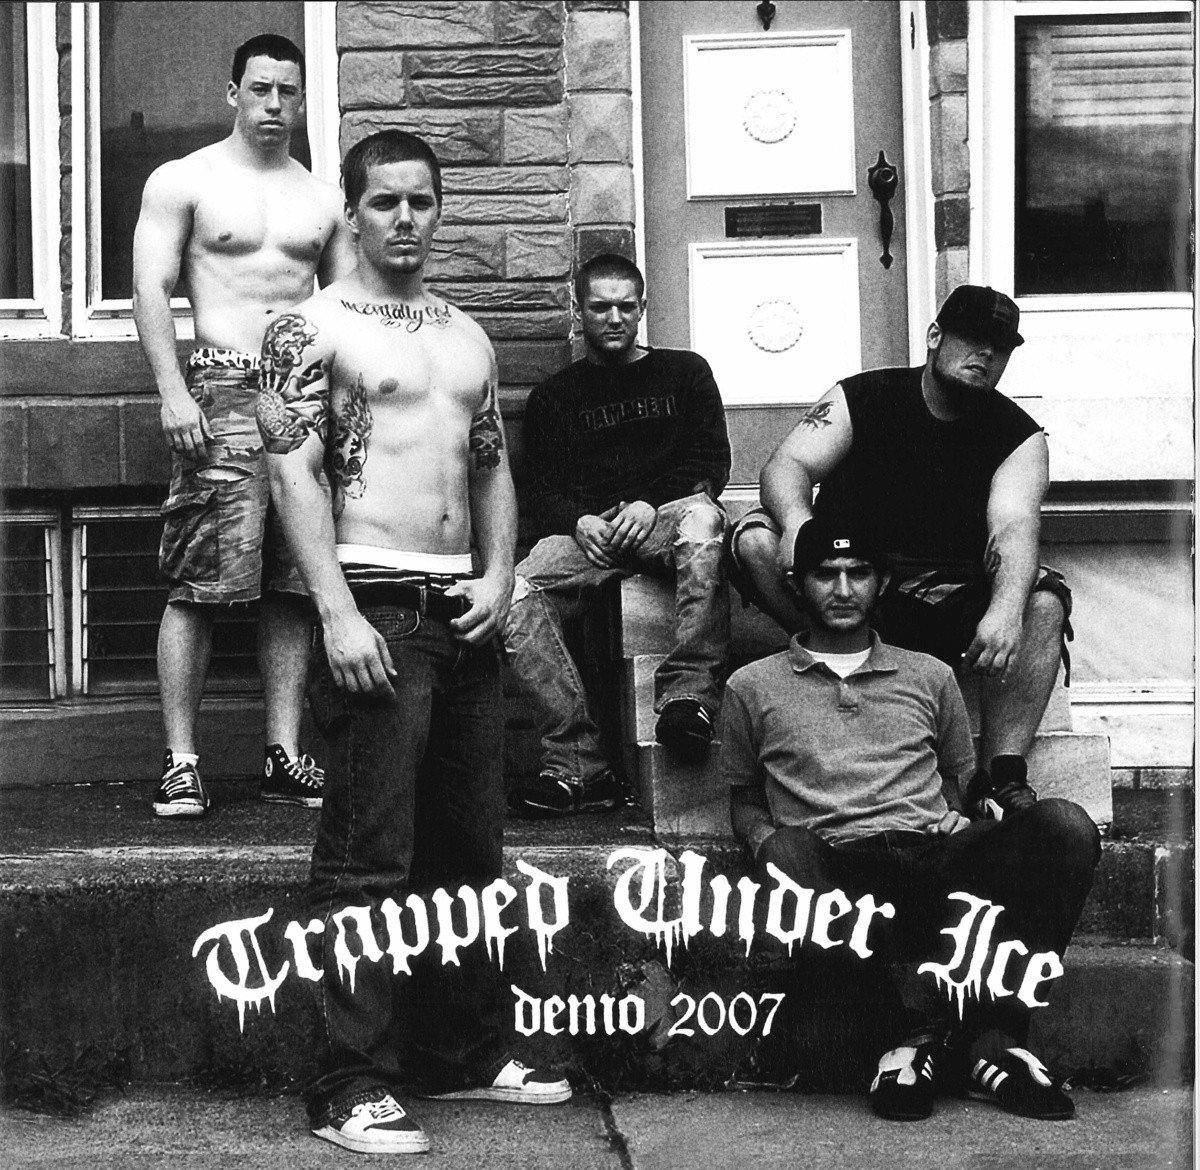 Buy – Trapped Under Ice "Demo 2007" 7" – Band & Music Merch – Cold Cuts Merch